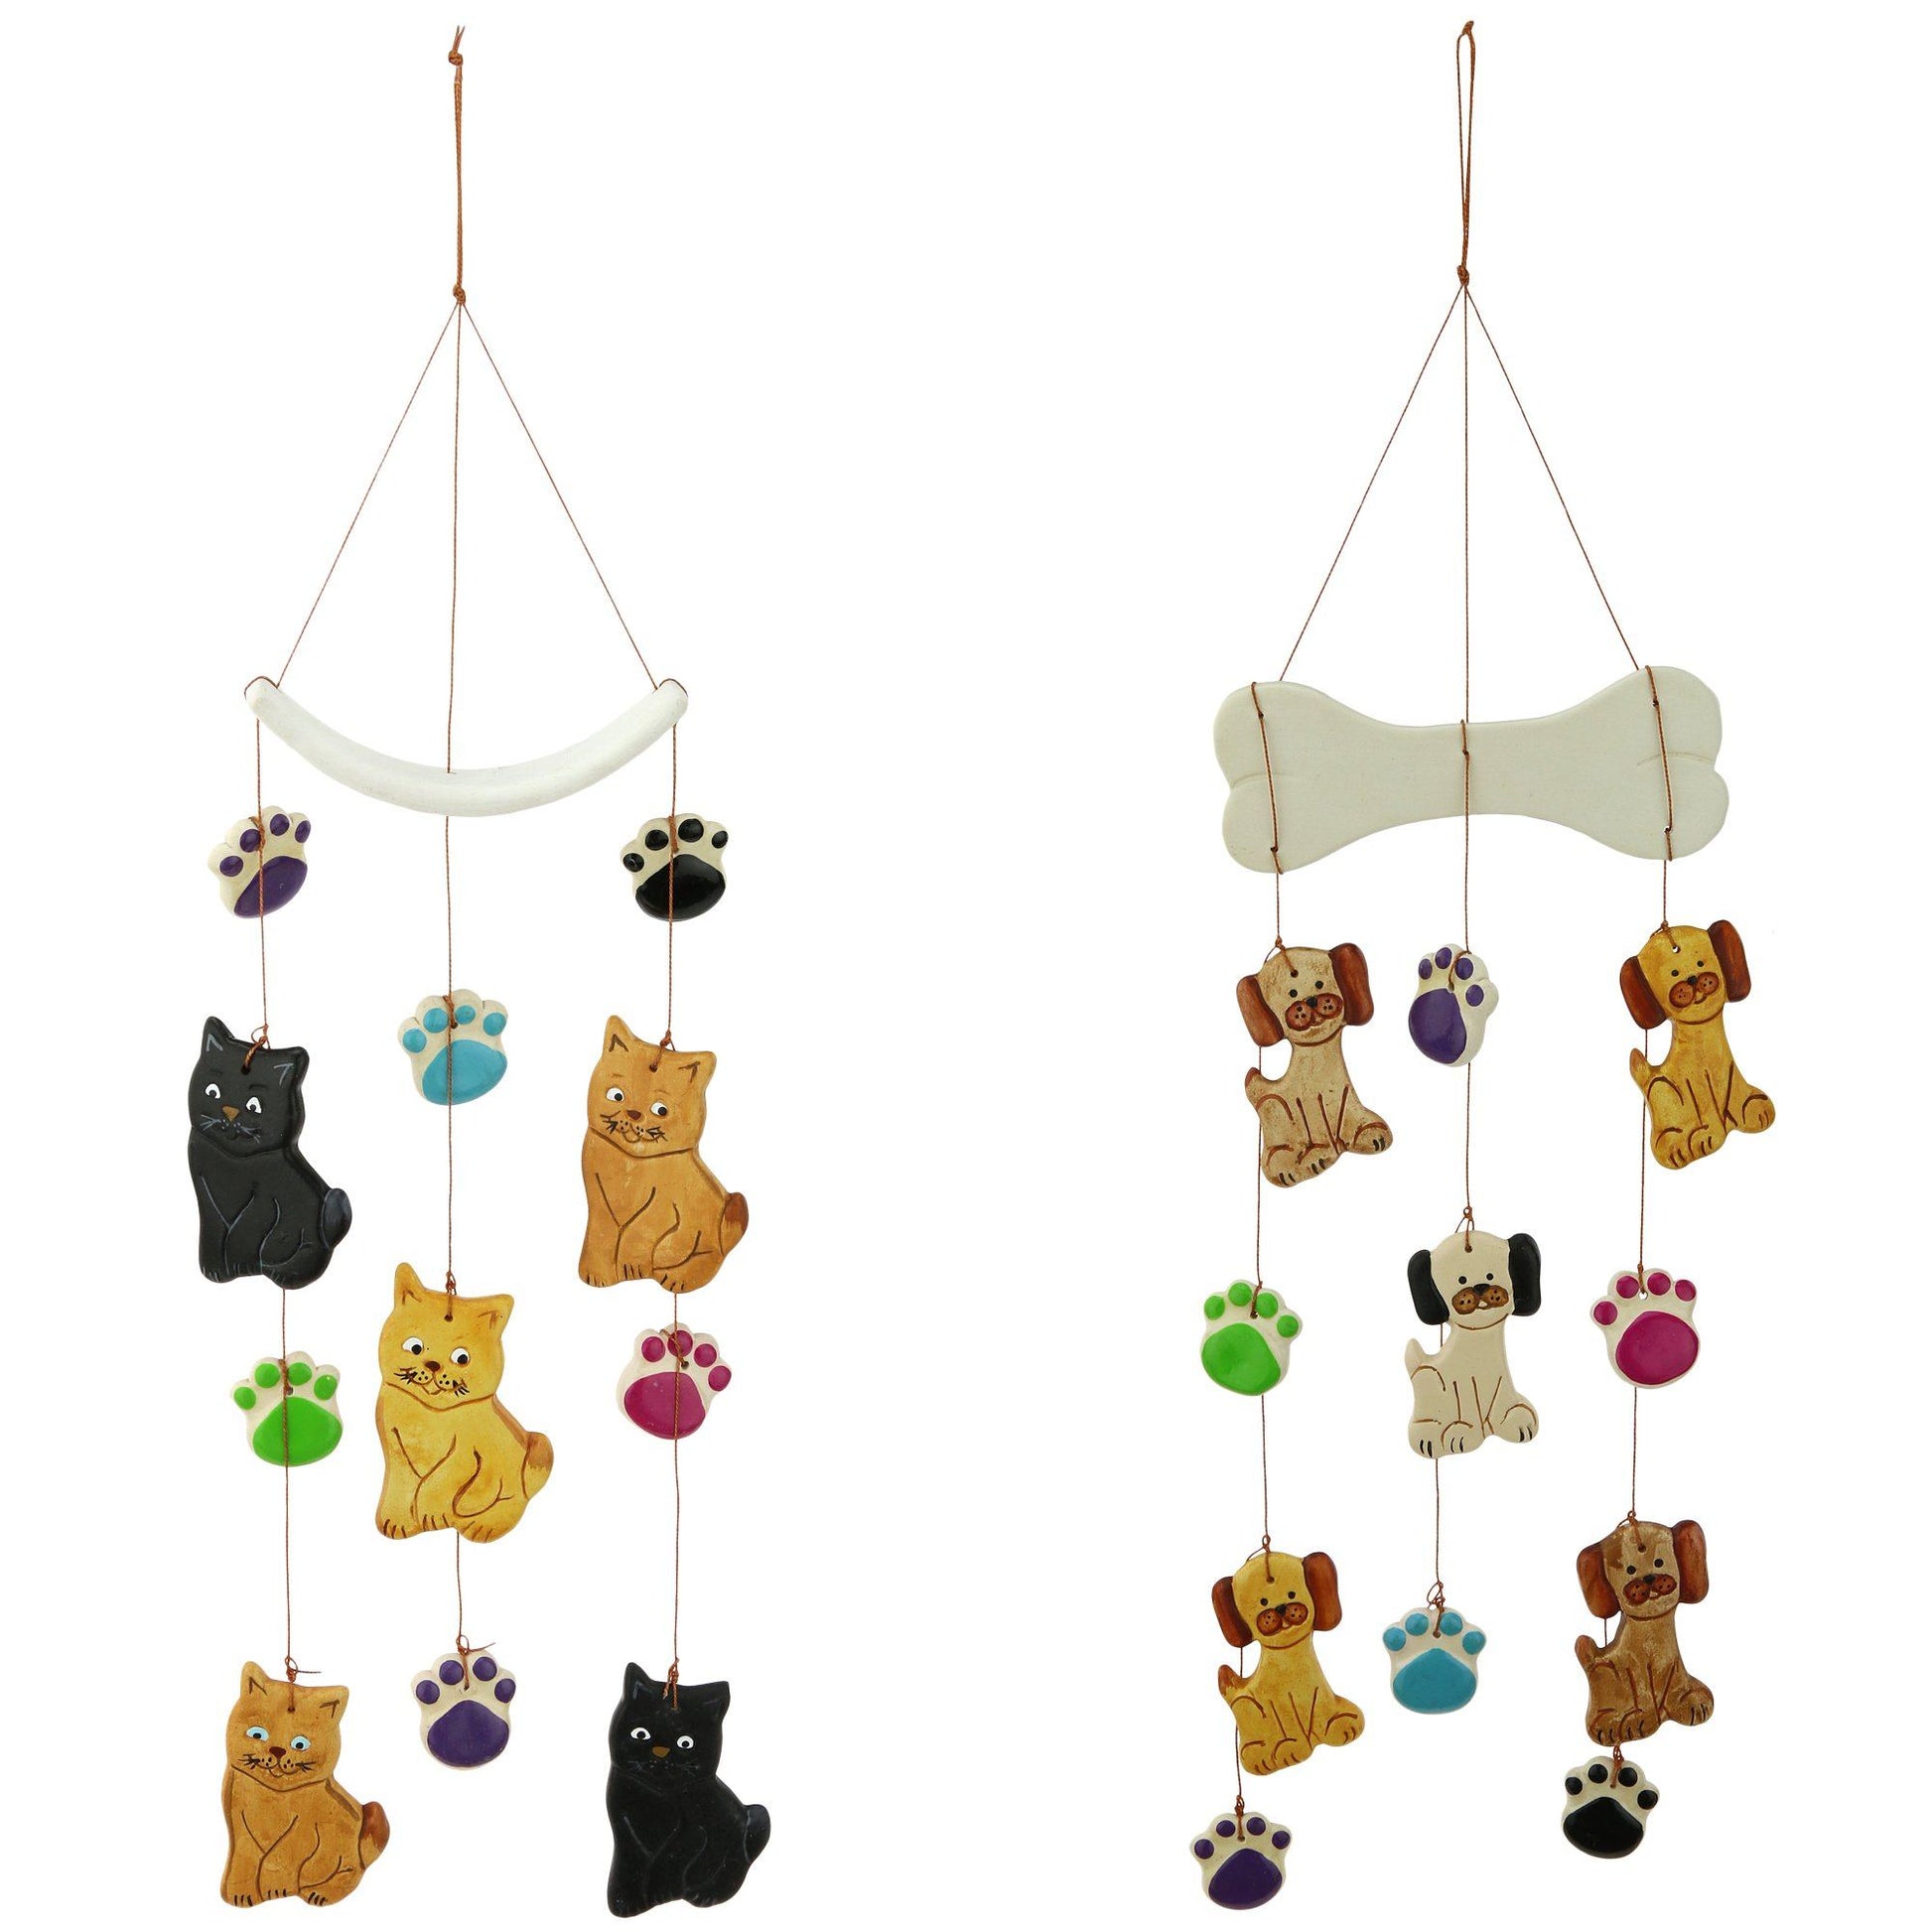 Pets & Paws Ceramic Chime